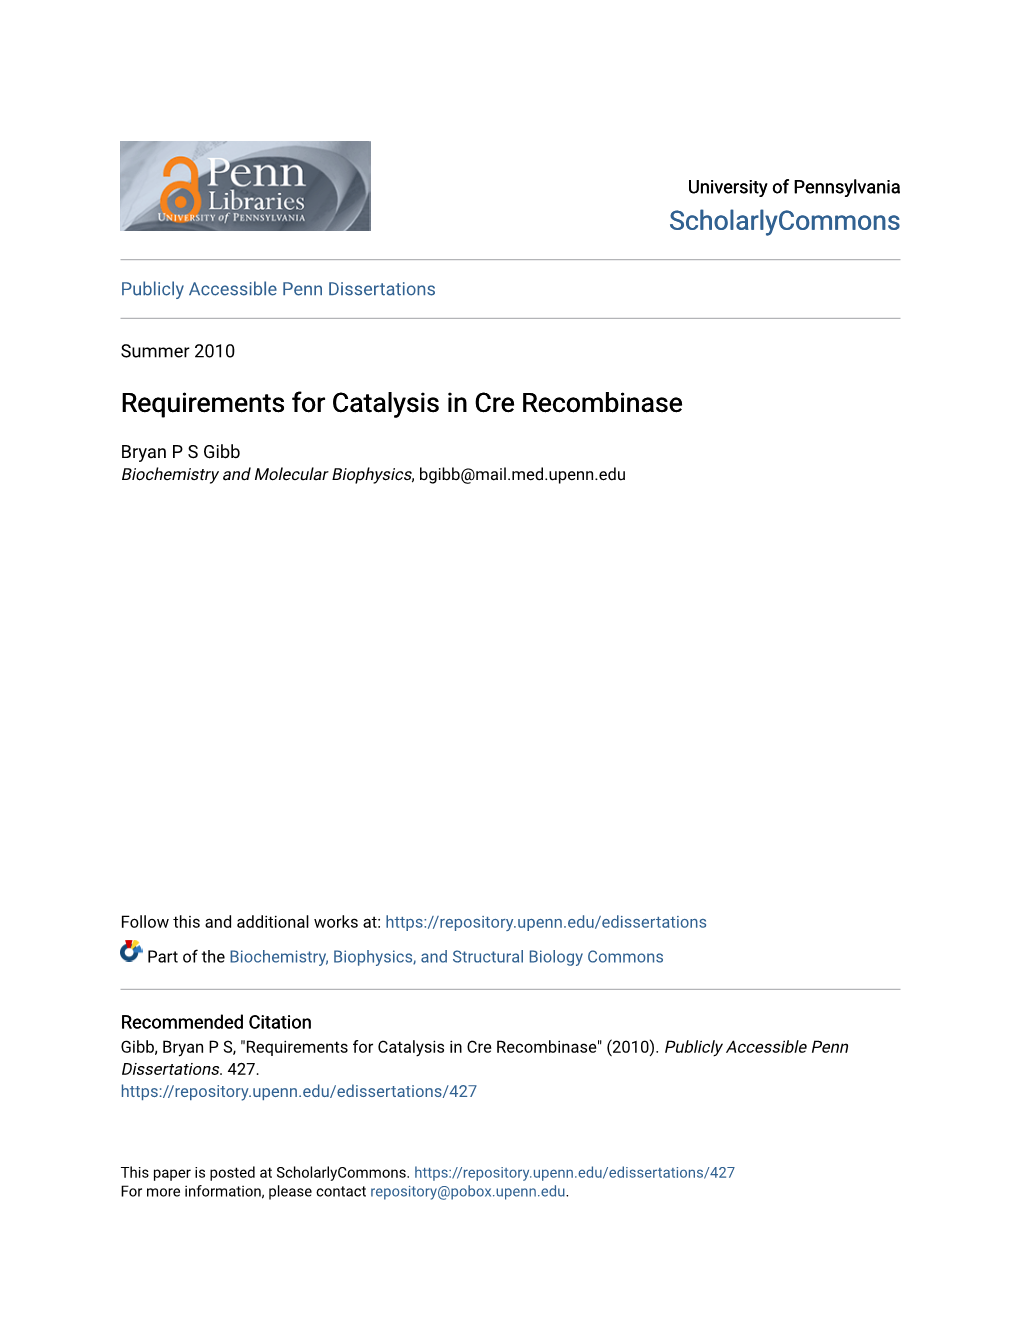 Requirements for Catalysis in Cre Recombinase